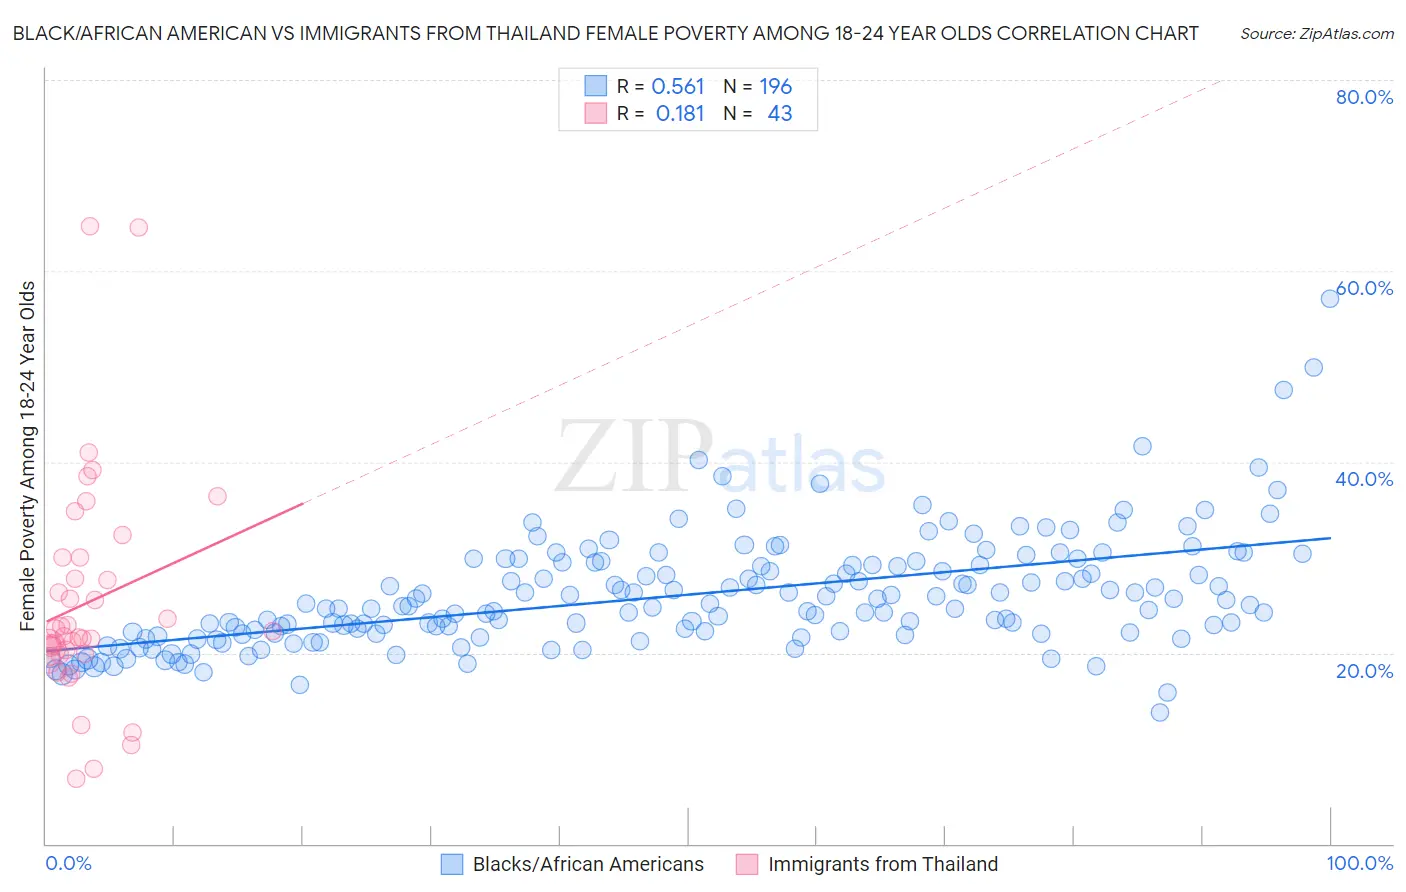 Black/African American vs Immigrants from Thailand Female Poverty Among 18-24 Year Olds